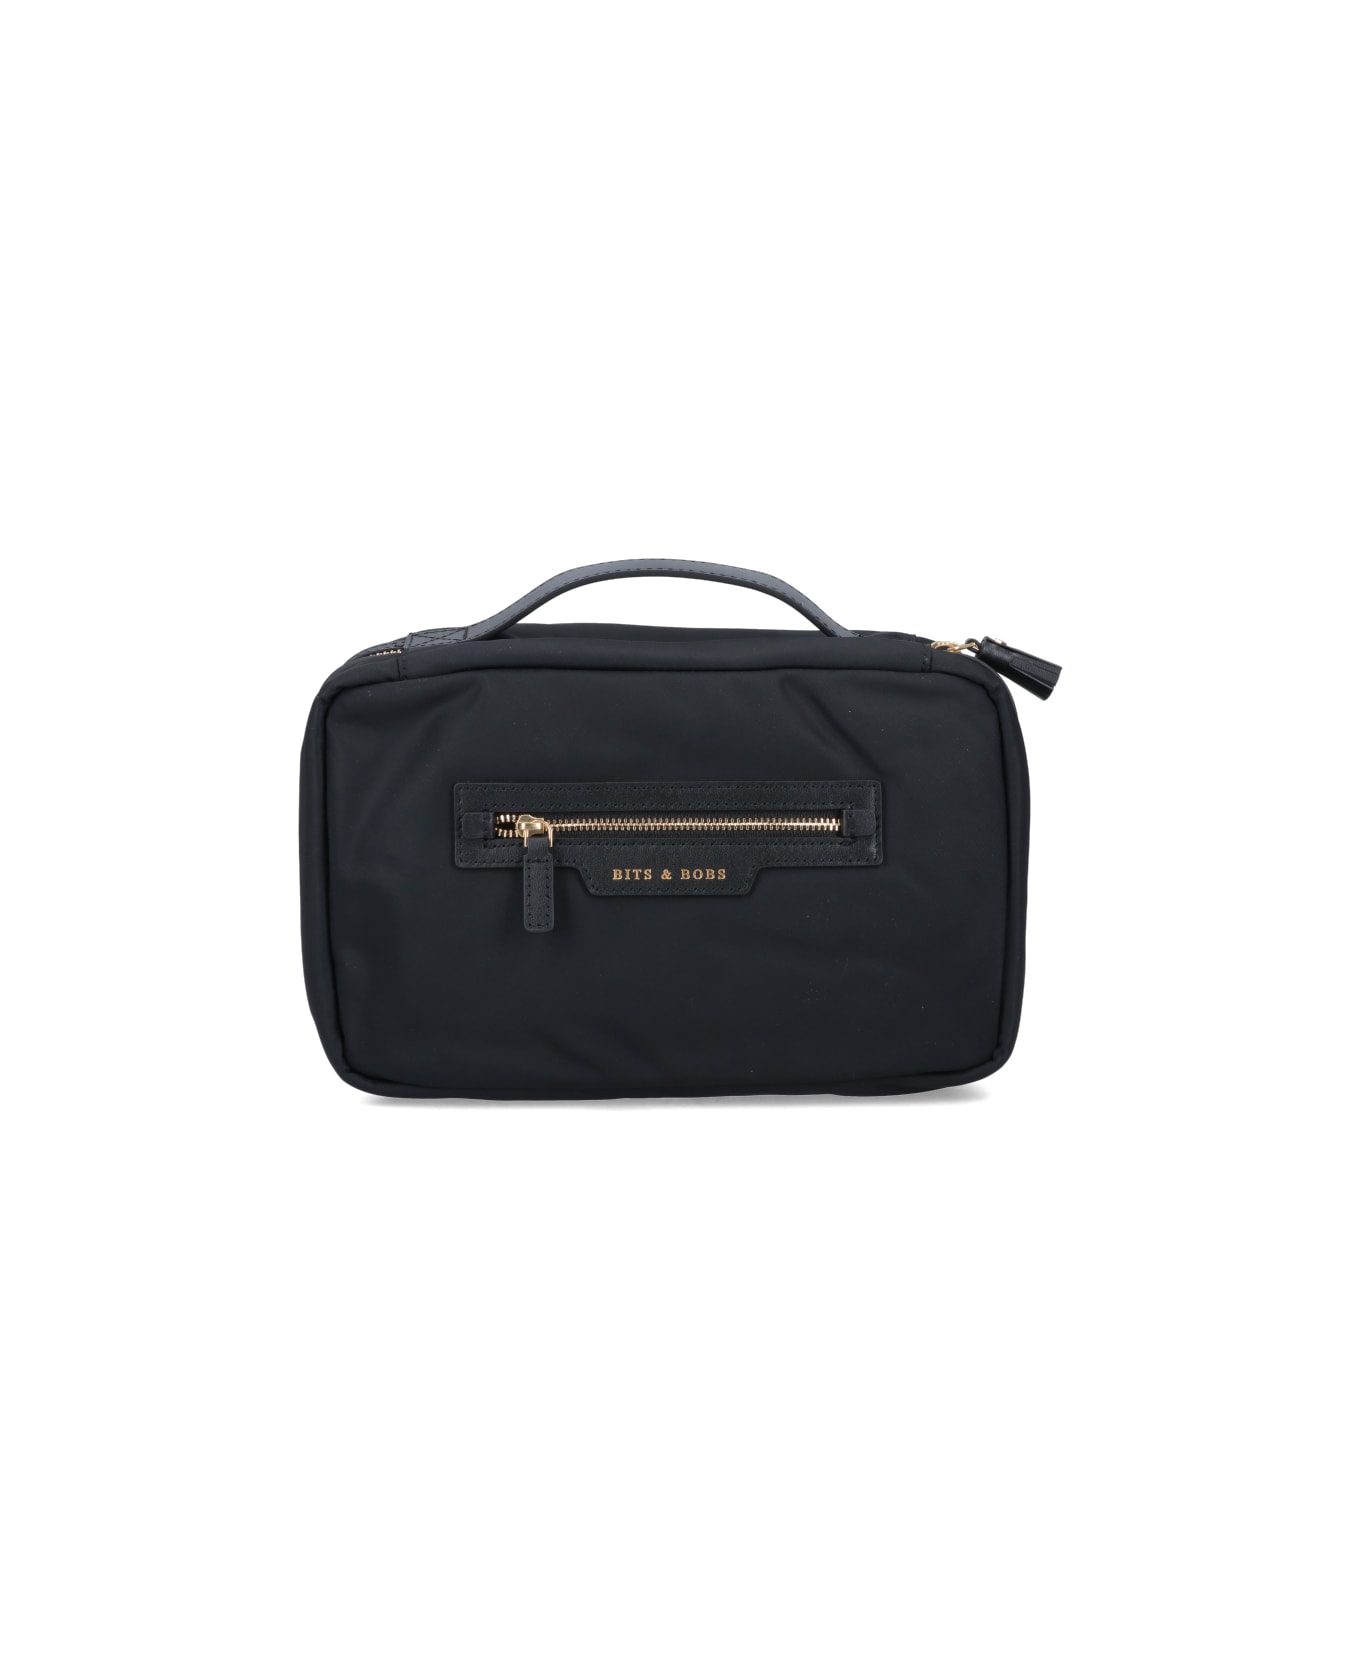 Anya Hindmarch 'bathroom Cabinet' Pouch - Black   バッグ